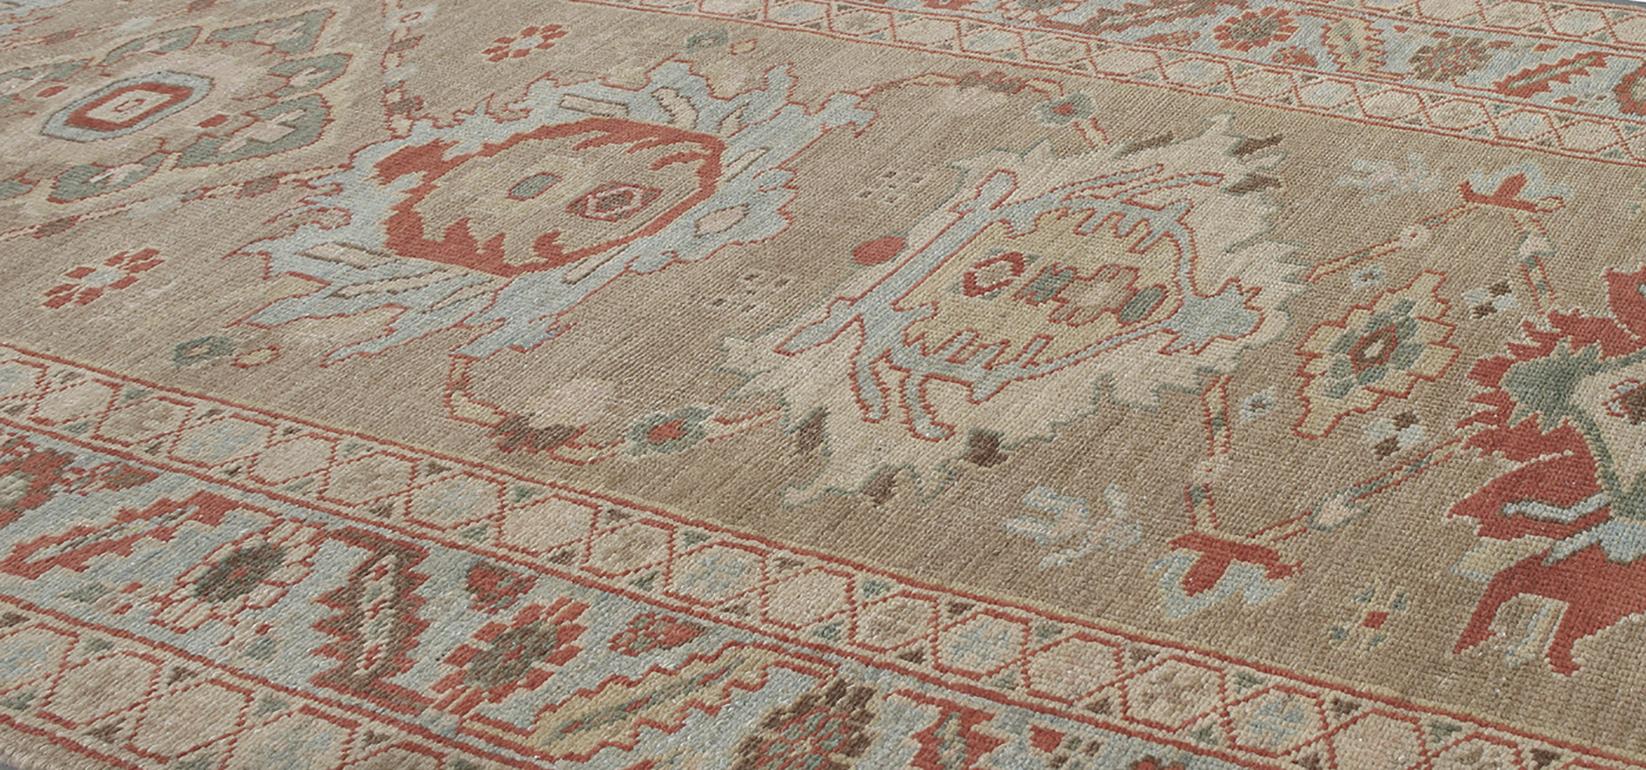 Made in Iran with the highest quality Persian hand-carded, hand-spun-wool and all vegetable dyes, this runner rug resembles the original prized antique Bakshaish rugs made in town of the same name. Located in the Heris region, it's noted as an area